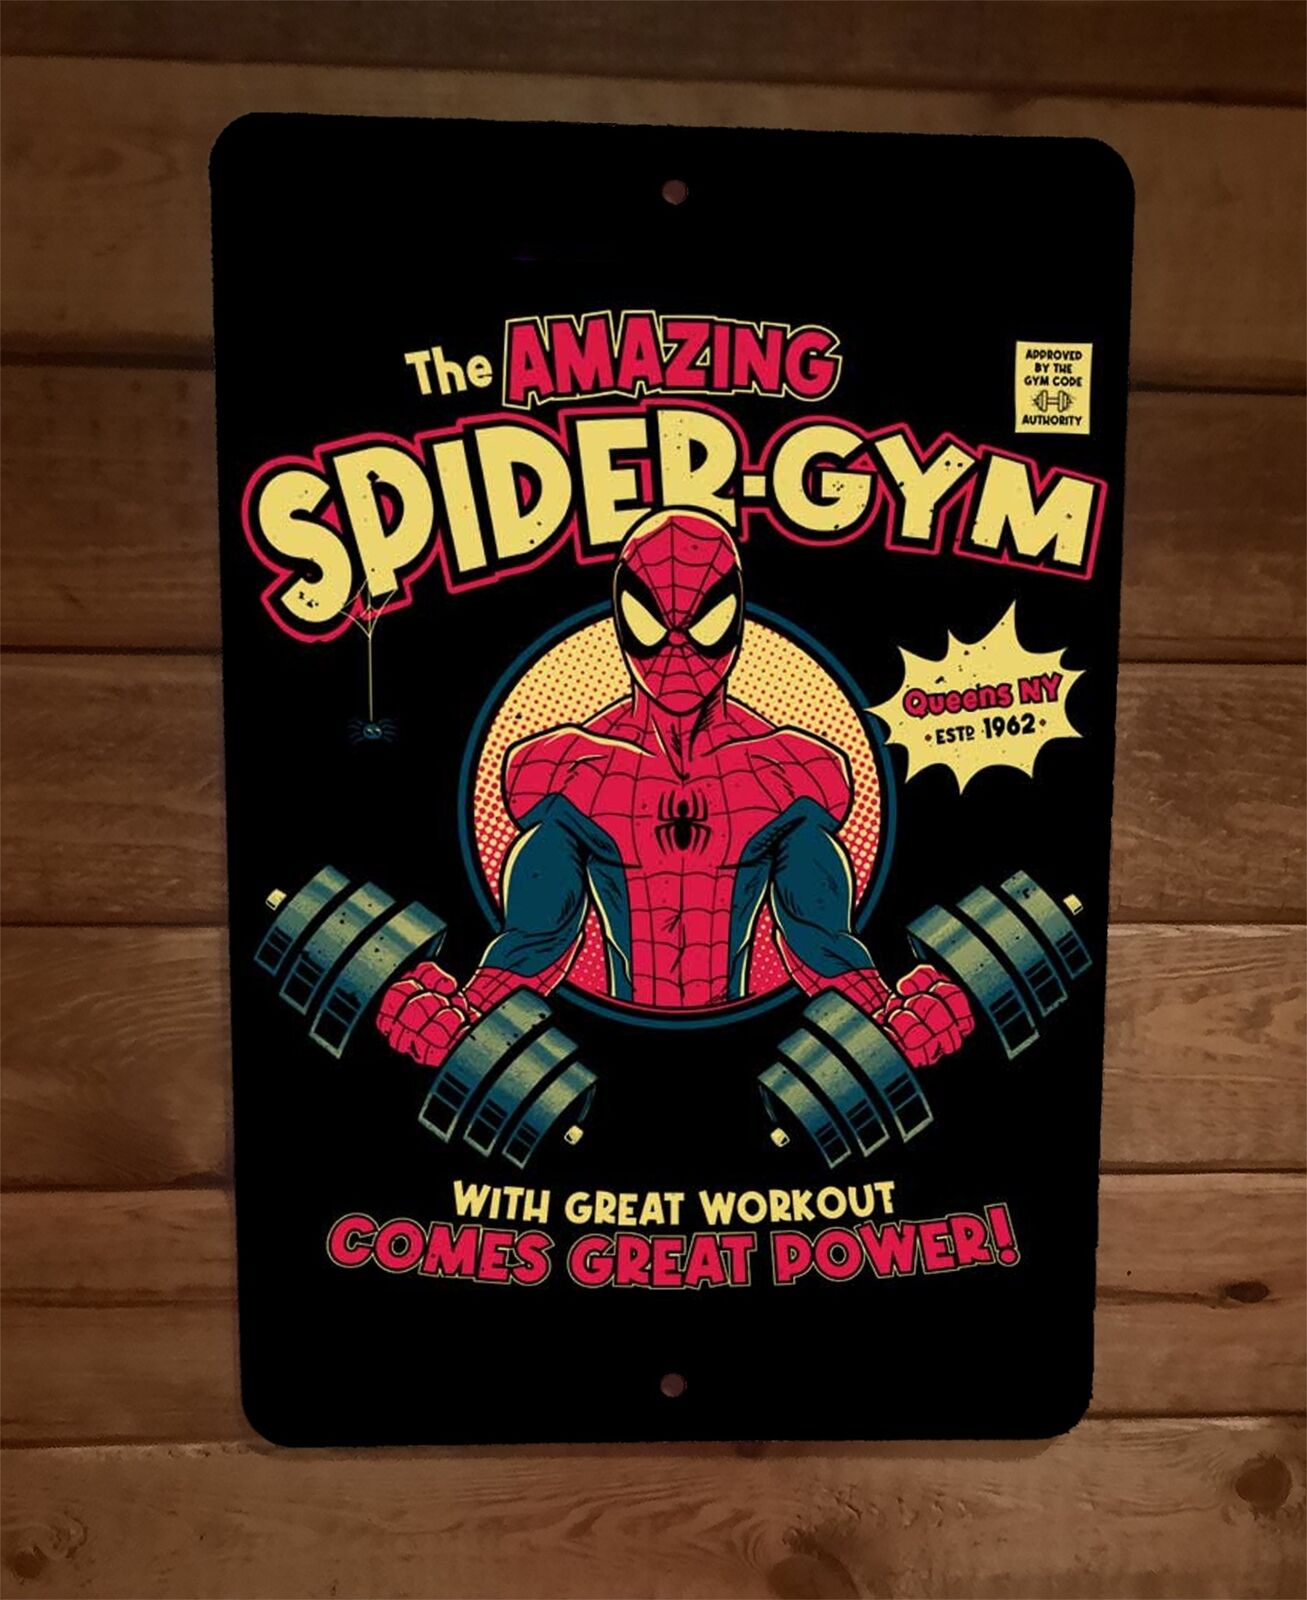 The Amazing Spider Gym 8x12 Metal Wall Sign Poster Marvel Comics Spiderman